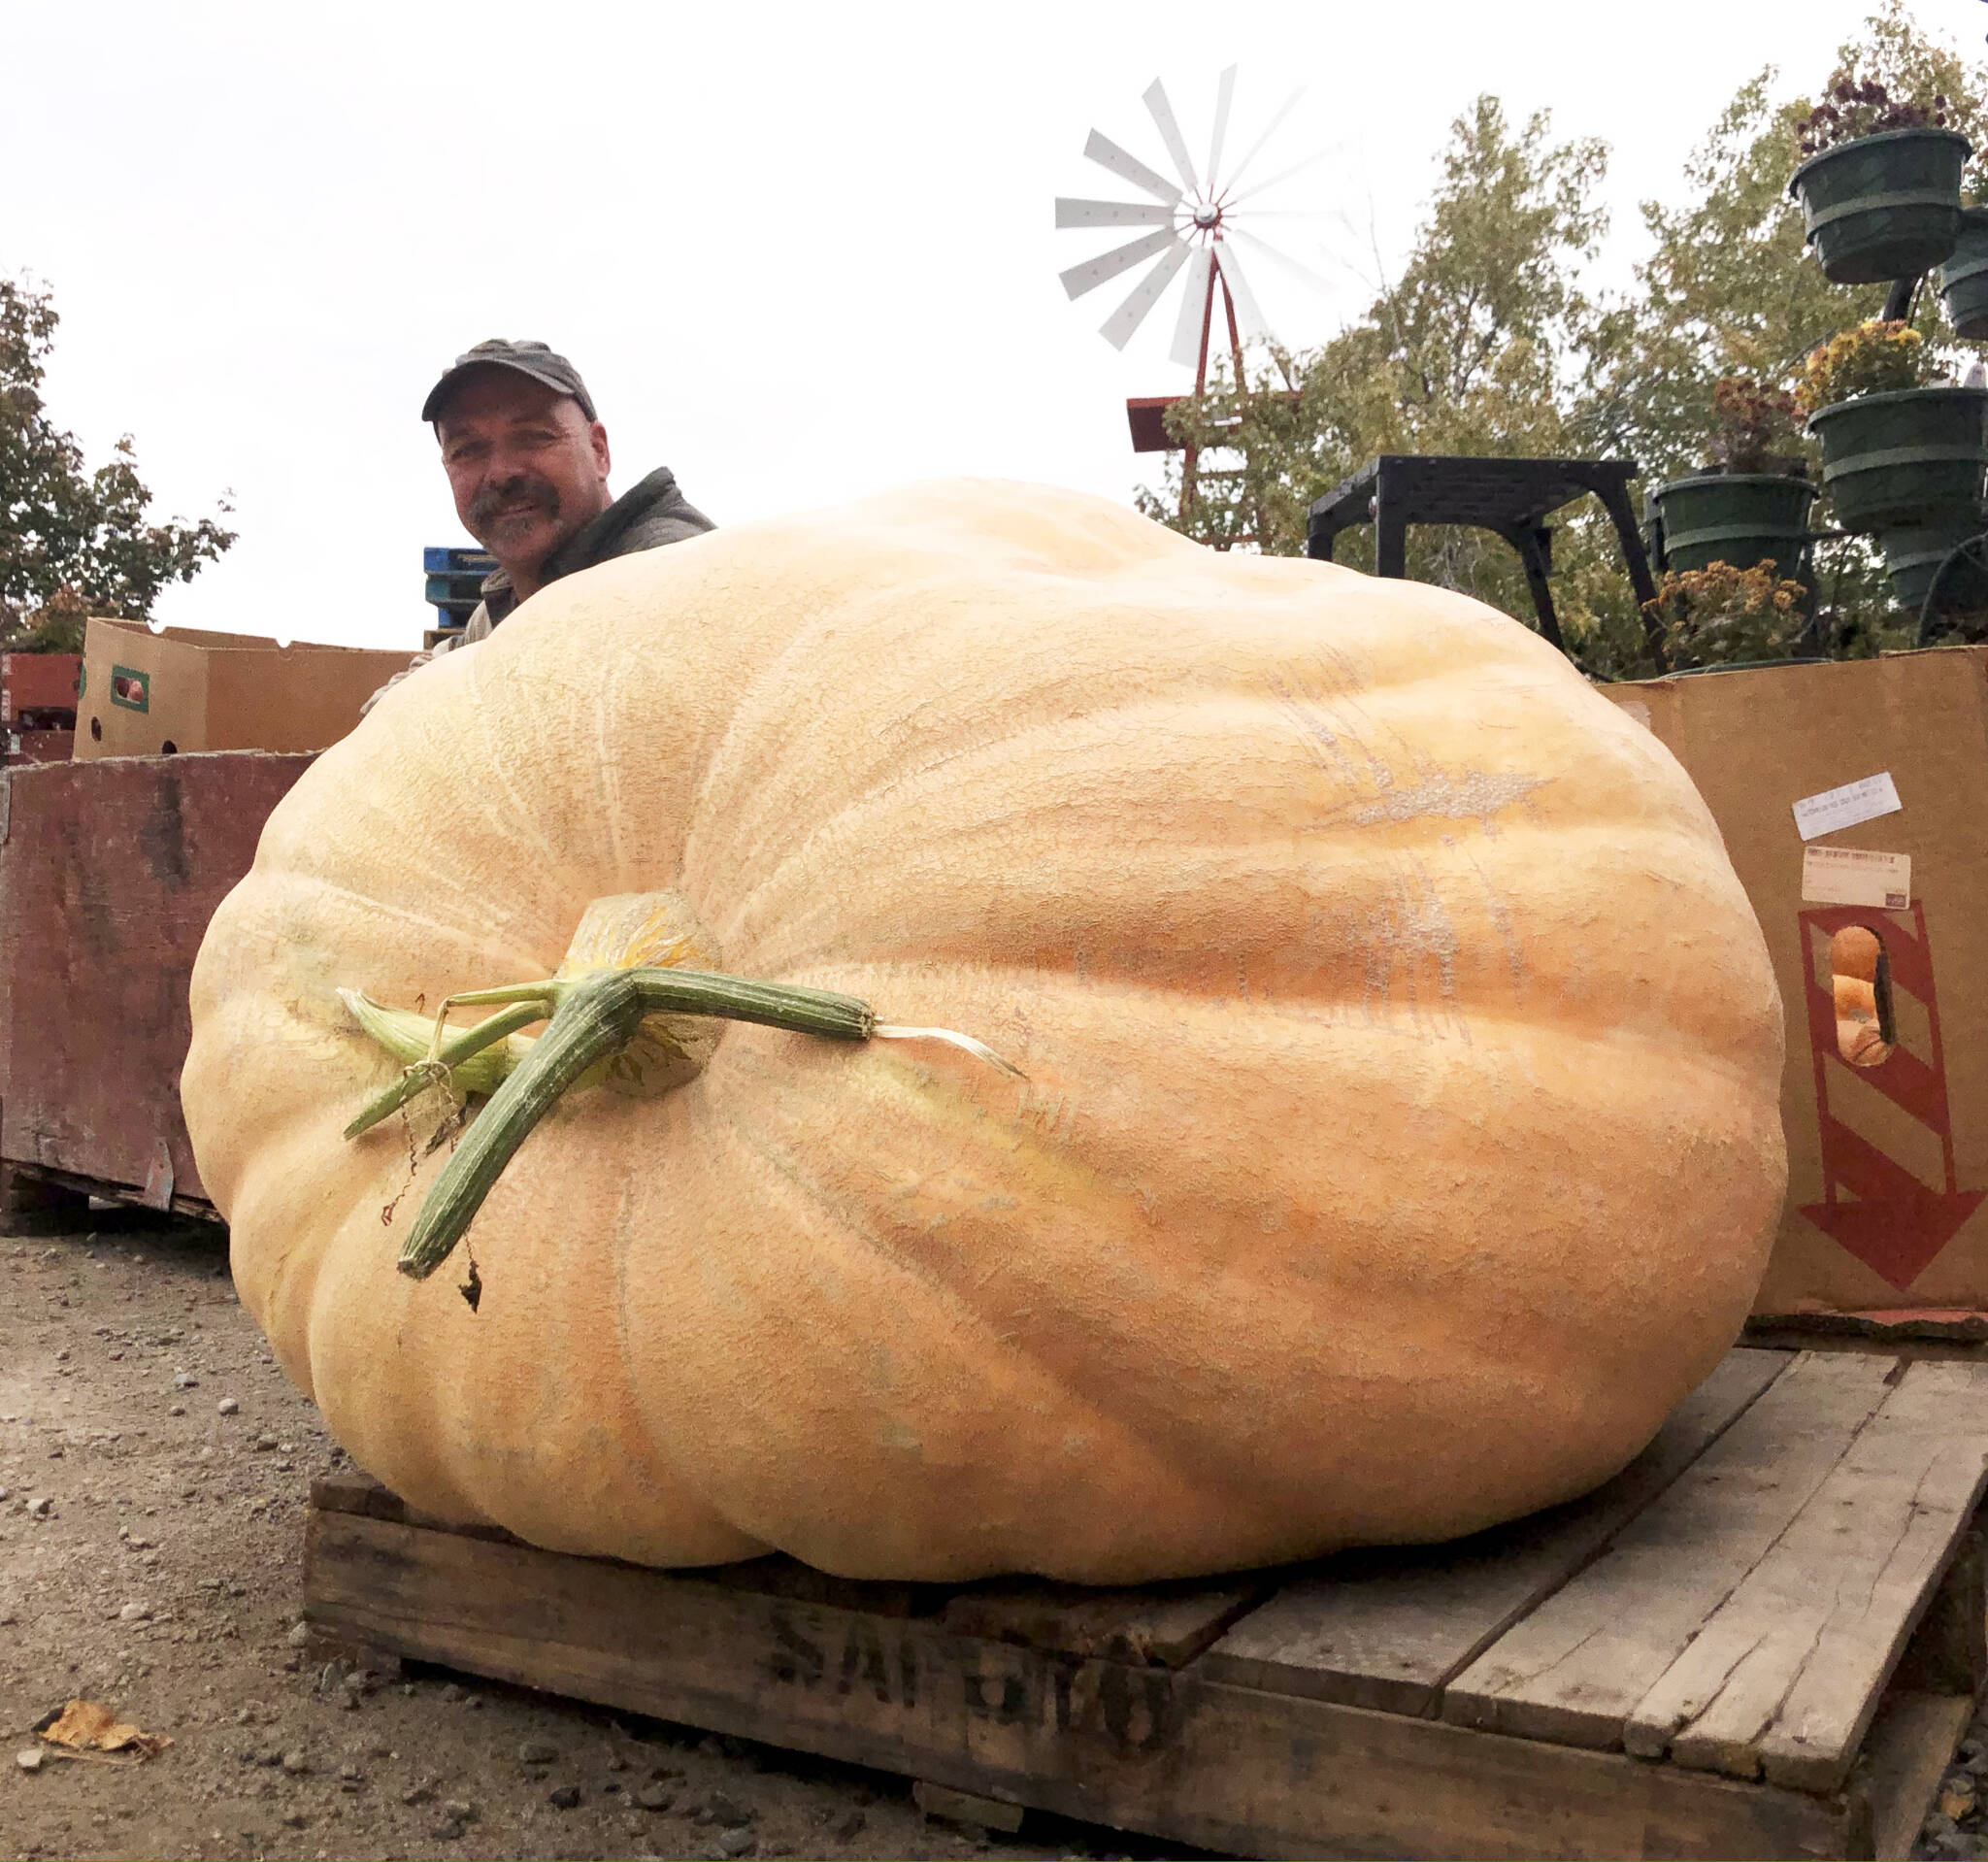 Billy Boerboom of Summerland shows a huge pumpkin he grew. Pumpkin pie is often a staple in traditional Thanksgiving meals. (Black Press file photo)